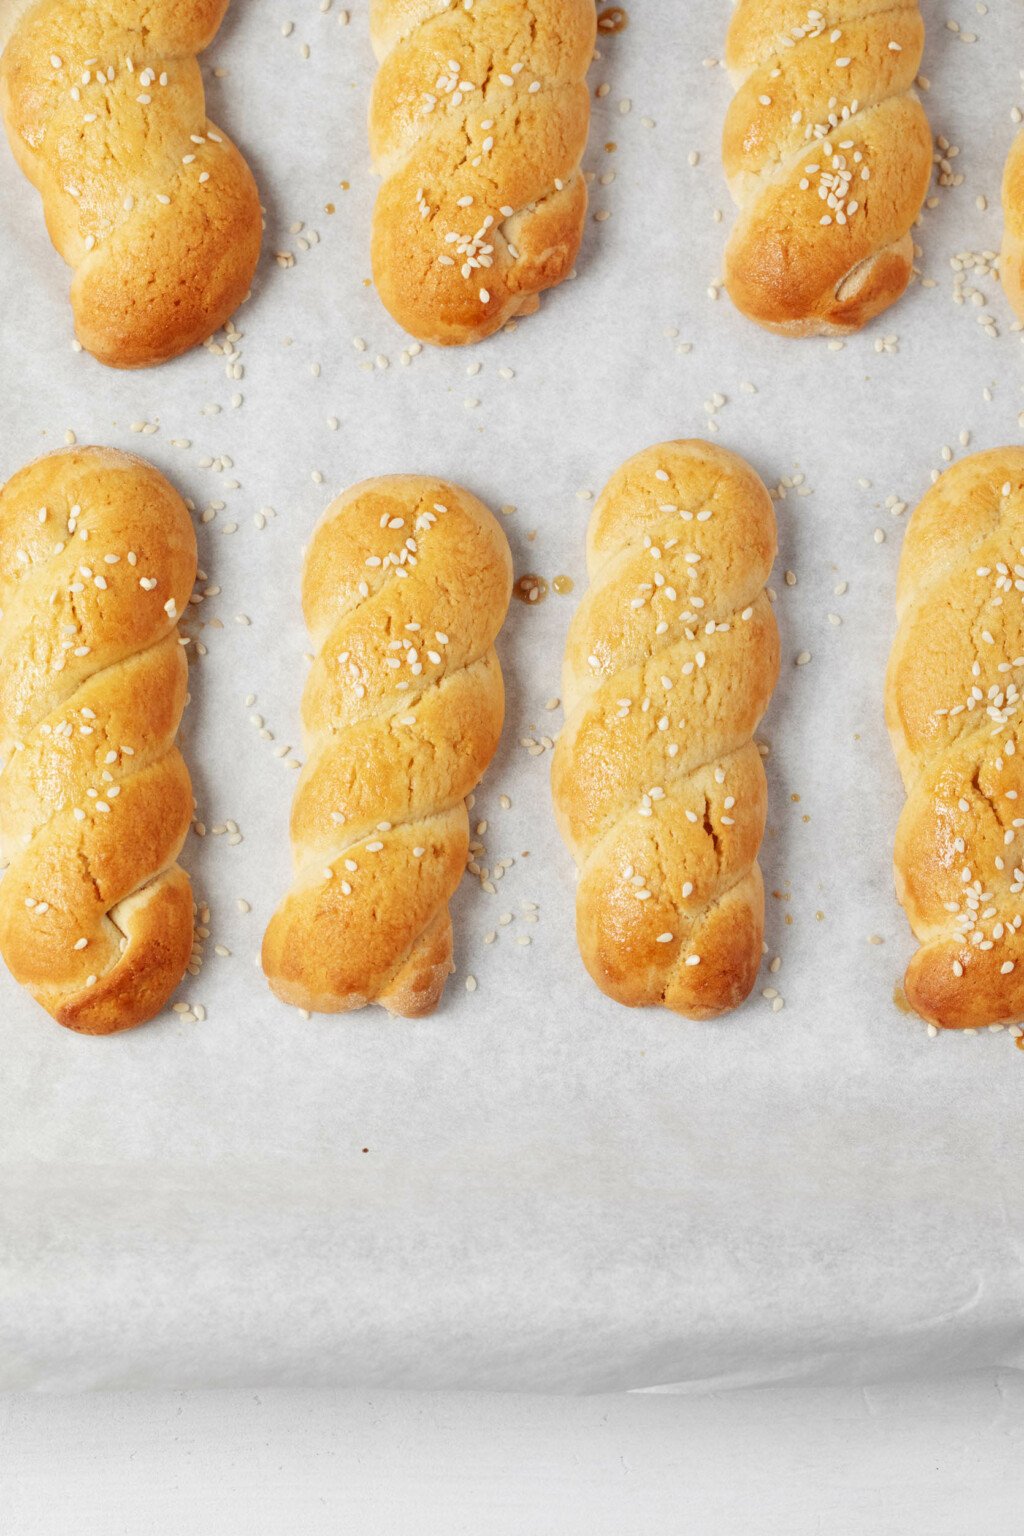 An overhead image of golden-brown, braided cookies on a parchment lined surface. 